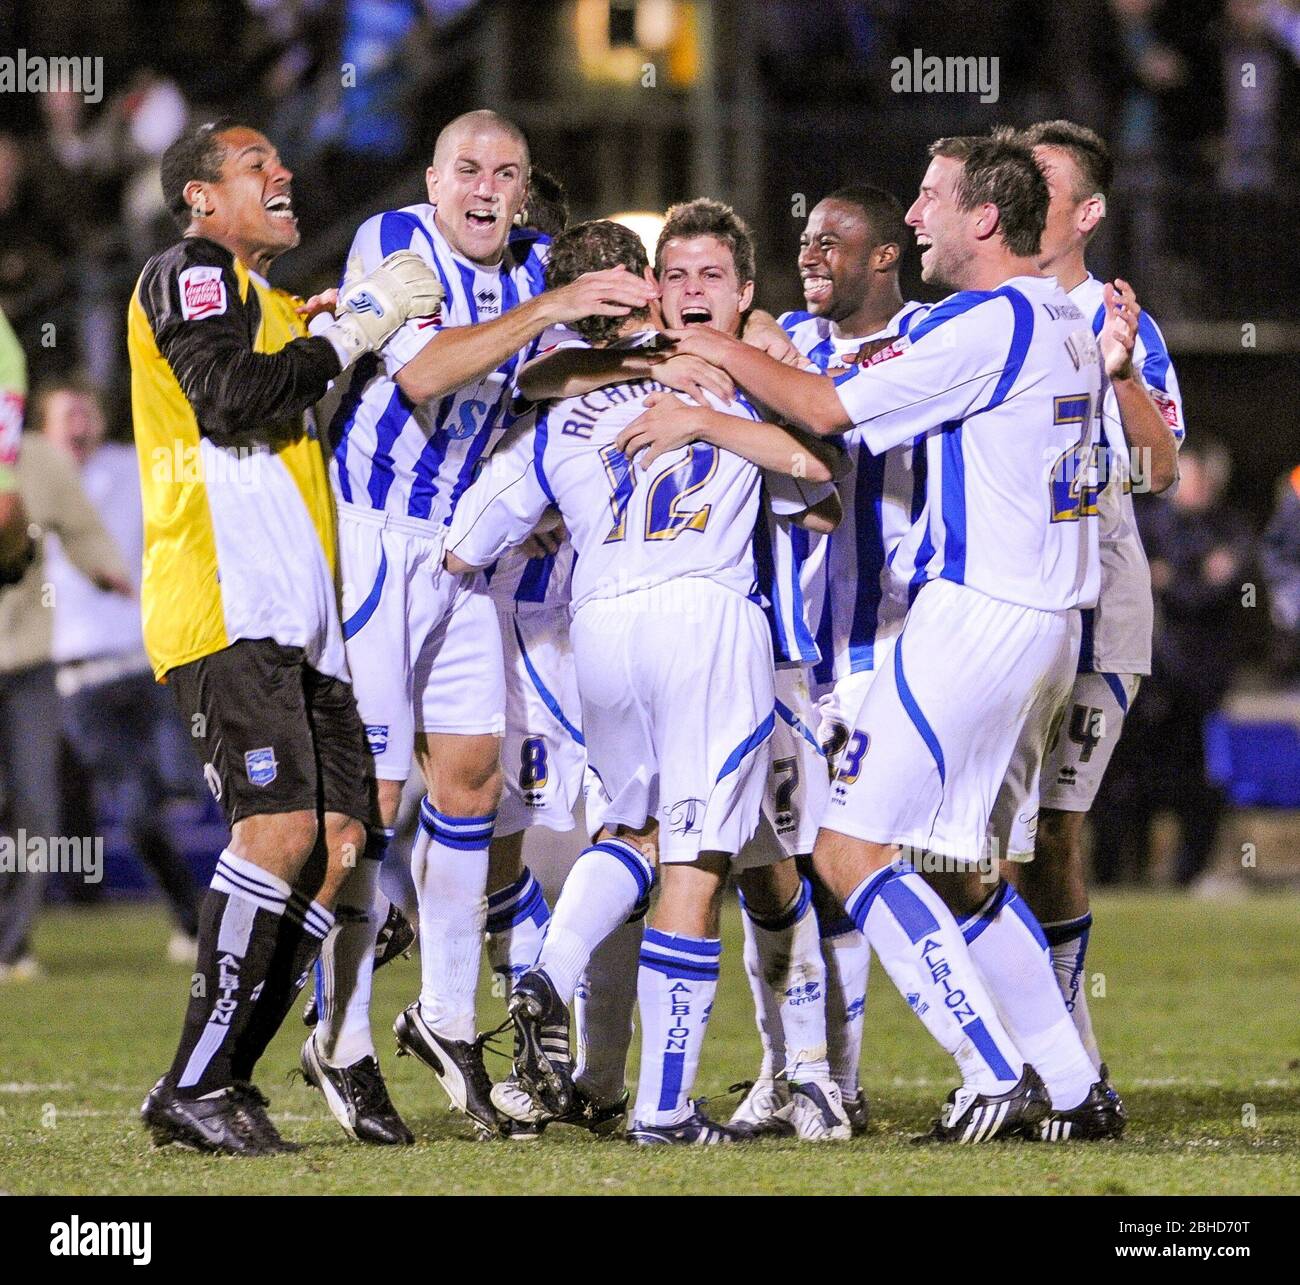 Brighton and Hove Albion v Manchester City Carling Cup match at Withdean  - Brighton's players celebrate the famous win over City  24 September 2008 - Editorial use only. No merchandising. For Football images FA and Premier League restrictions apply inc. no internet/mobile usage without FAPL license - for details contact Football Dataco Stock Photo